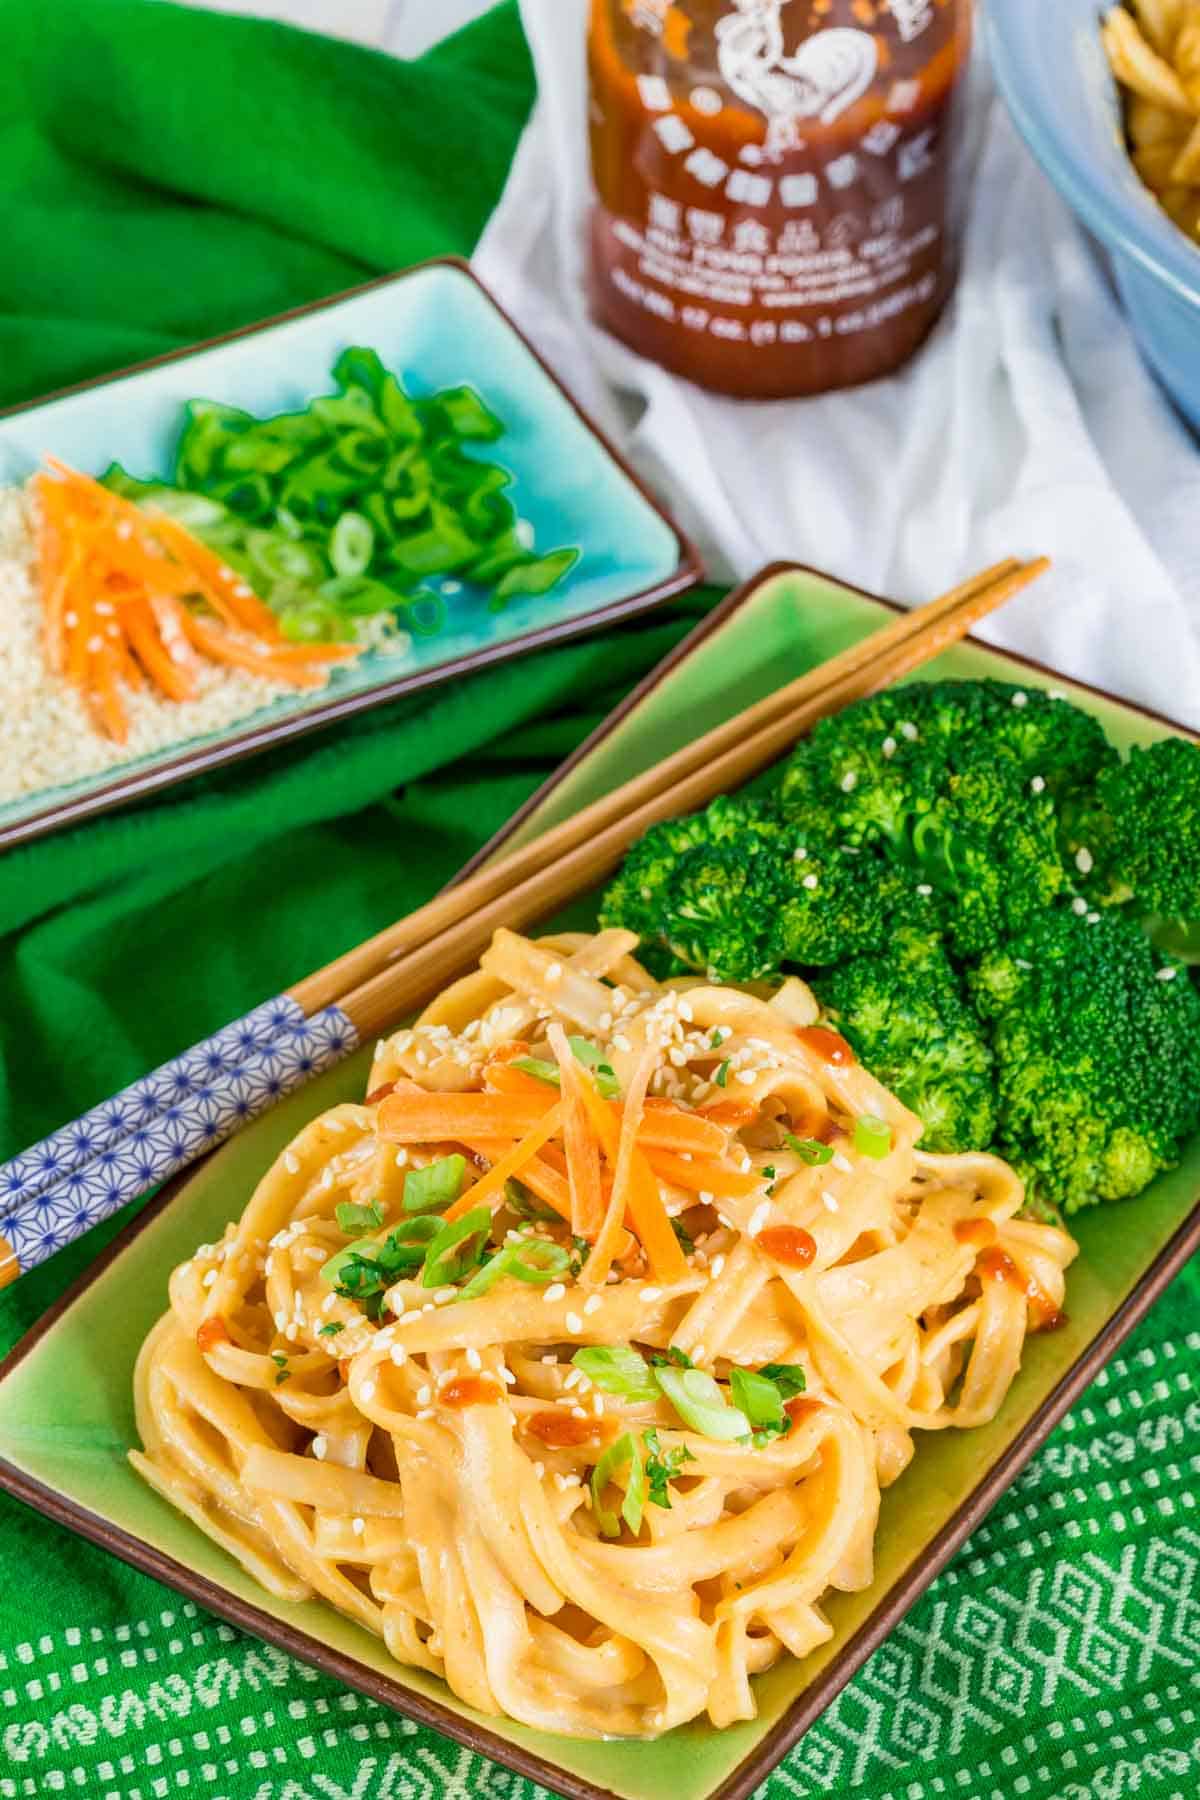 A place of sesame noodles with broccoli alongside a small plate of garnishes for the noodles.